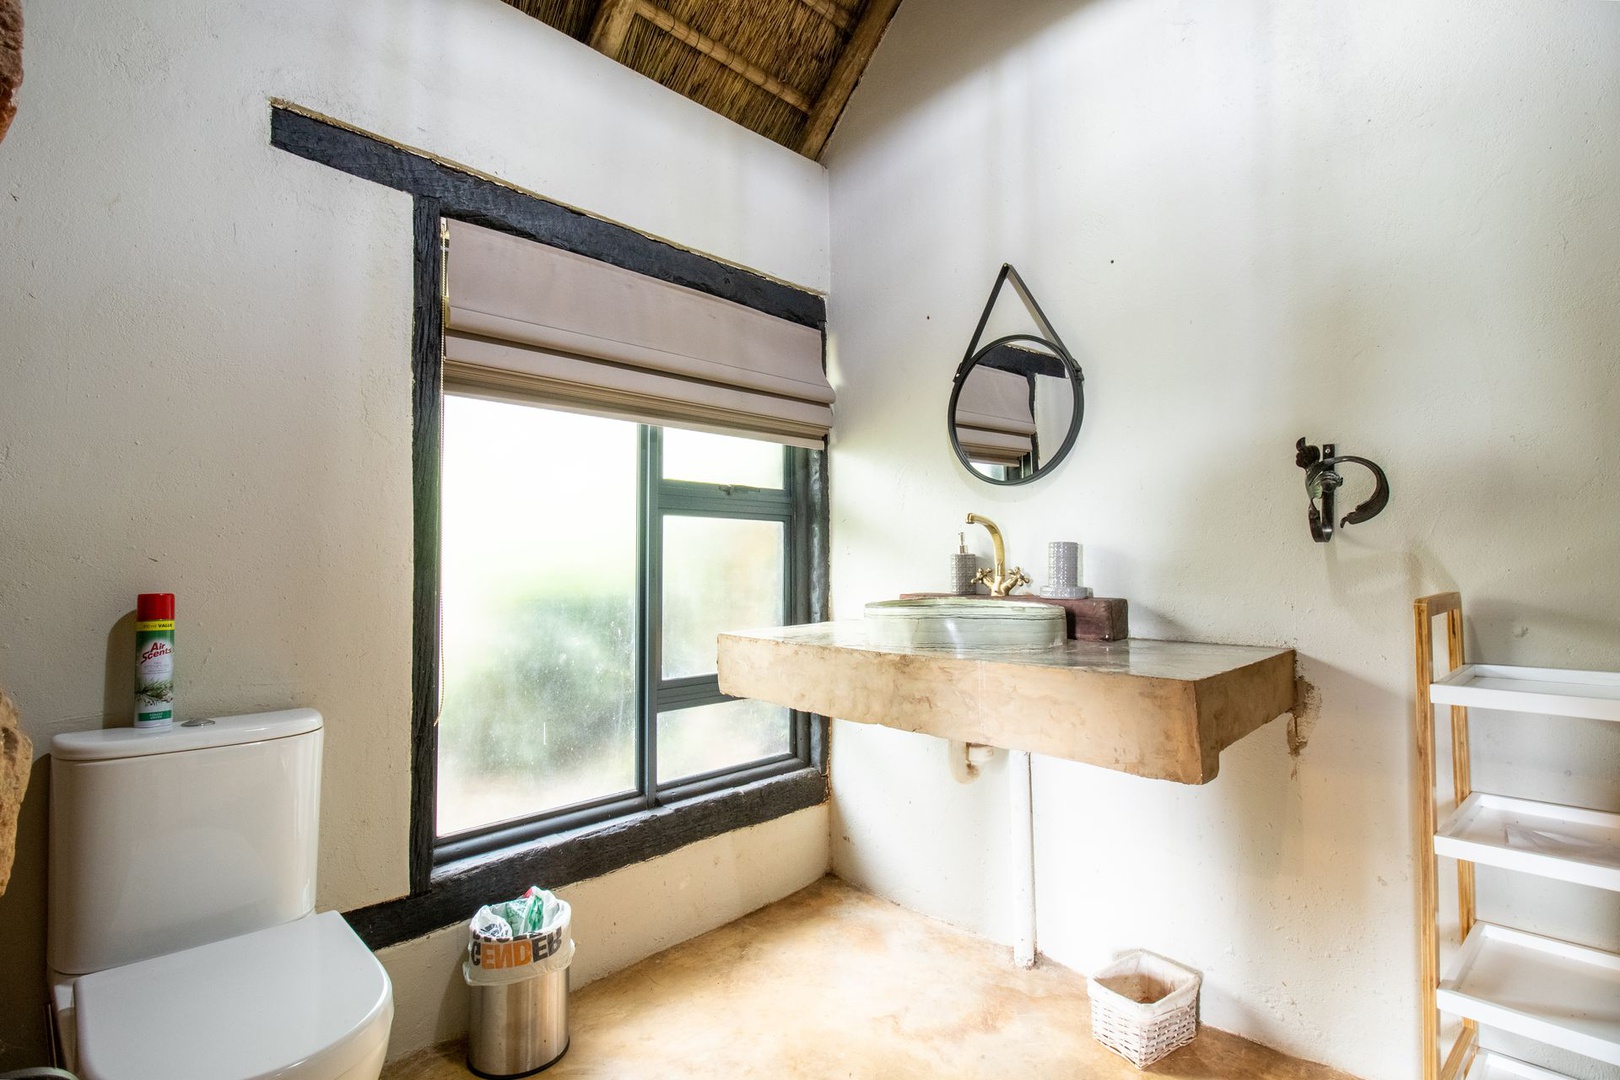 House in Kosmos - En-suite bathroom - beautiful natural finishes